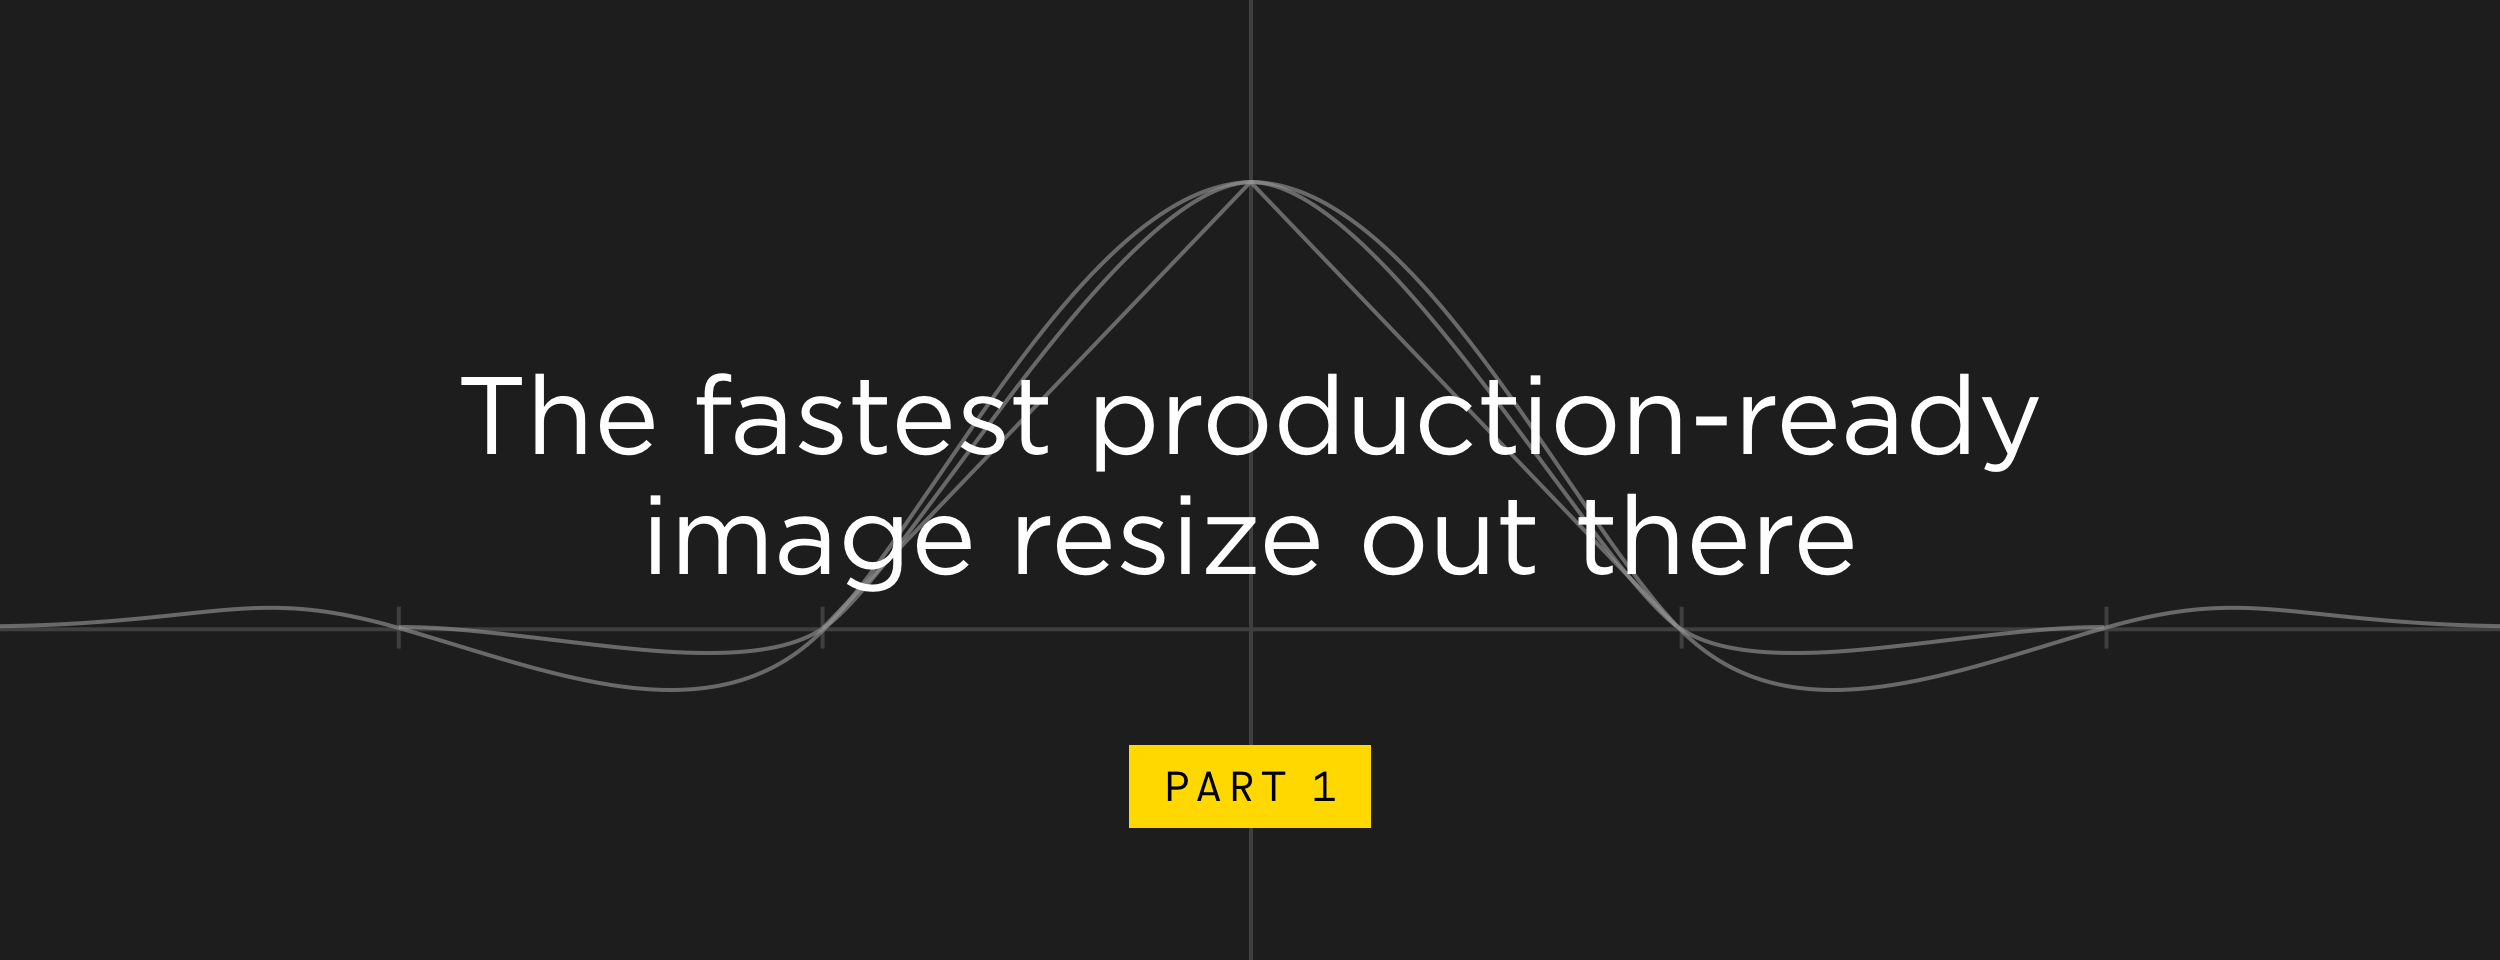 The fastest production-ready image resize out there. Part 1. General optimizations